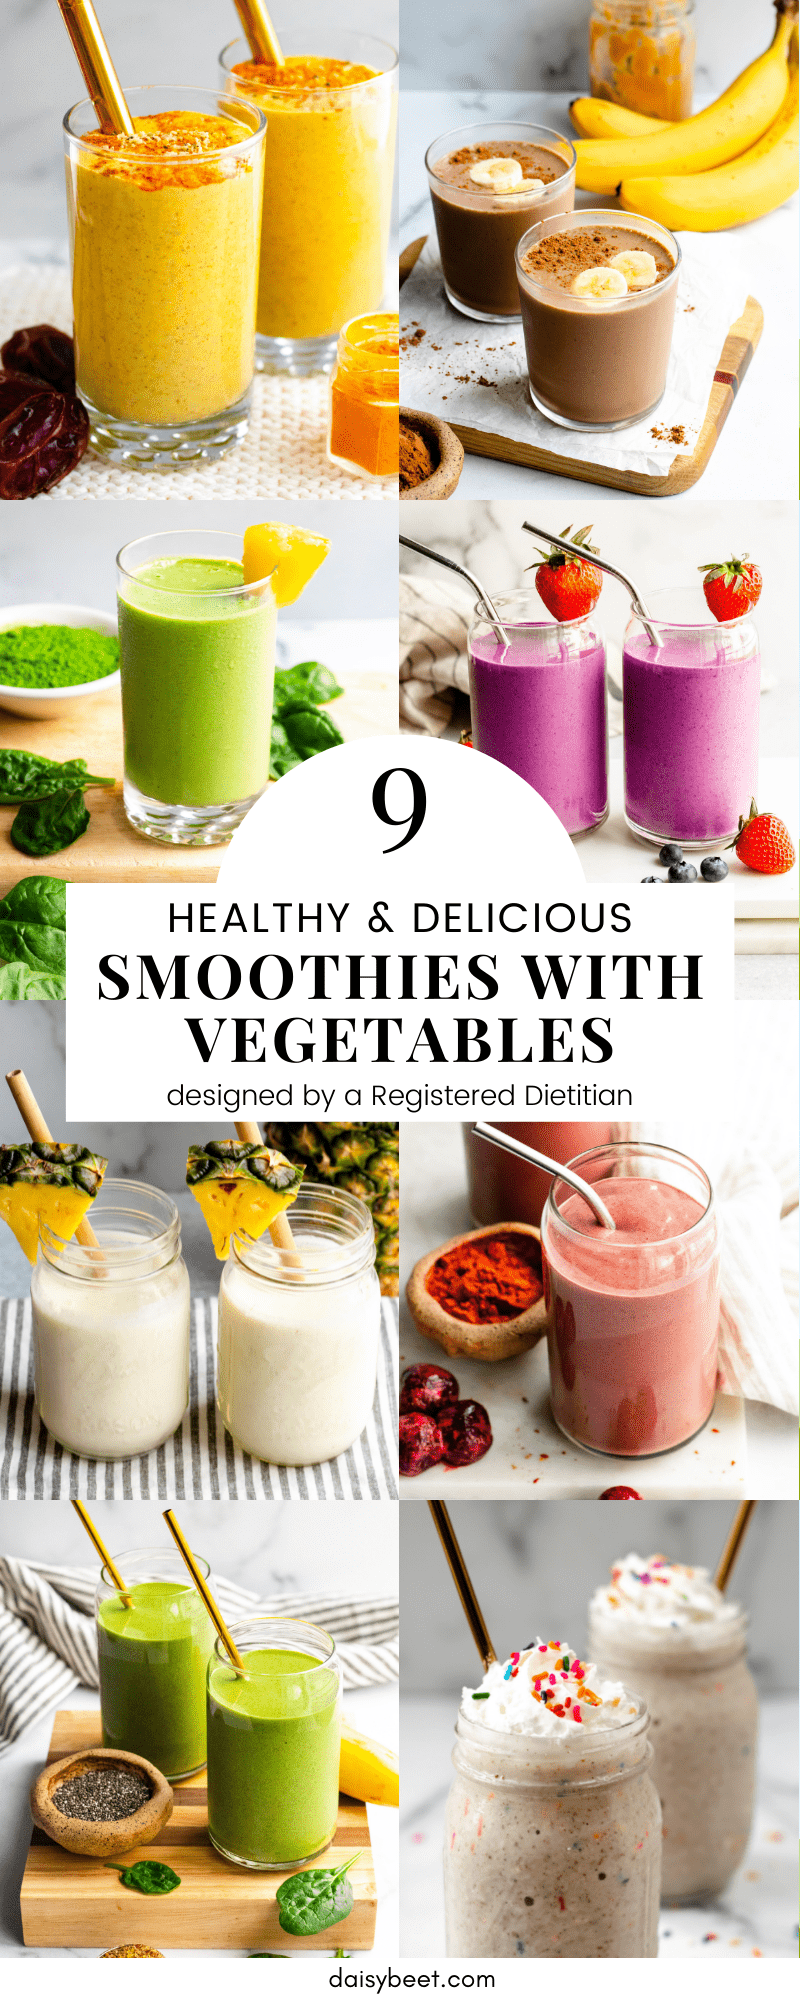 Graphic with photos of different smoothies with vegetables